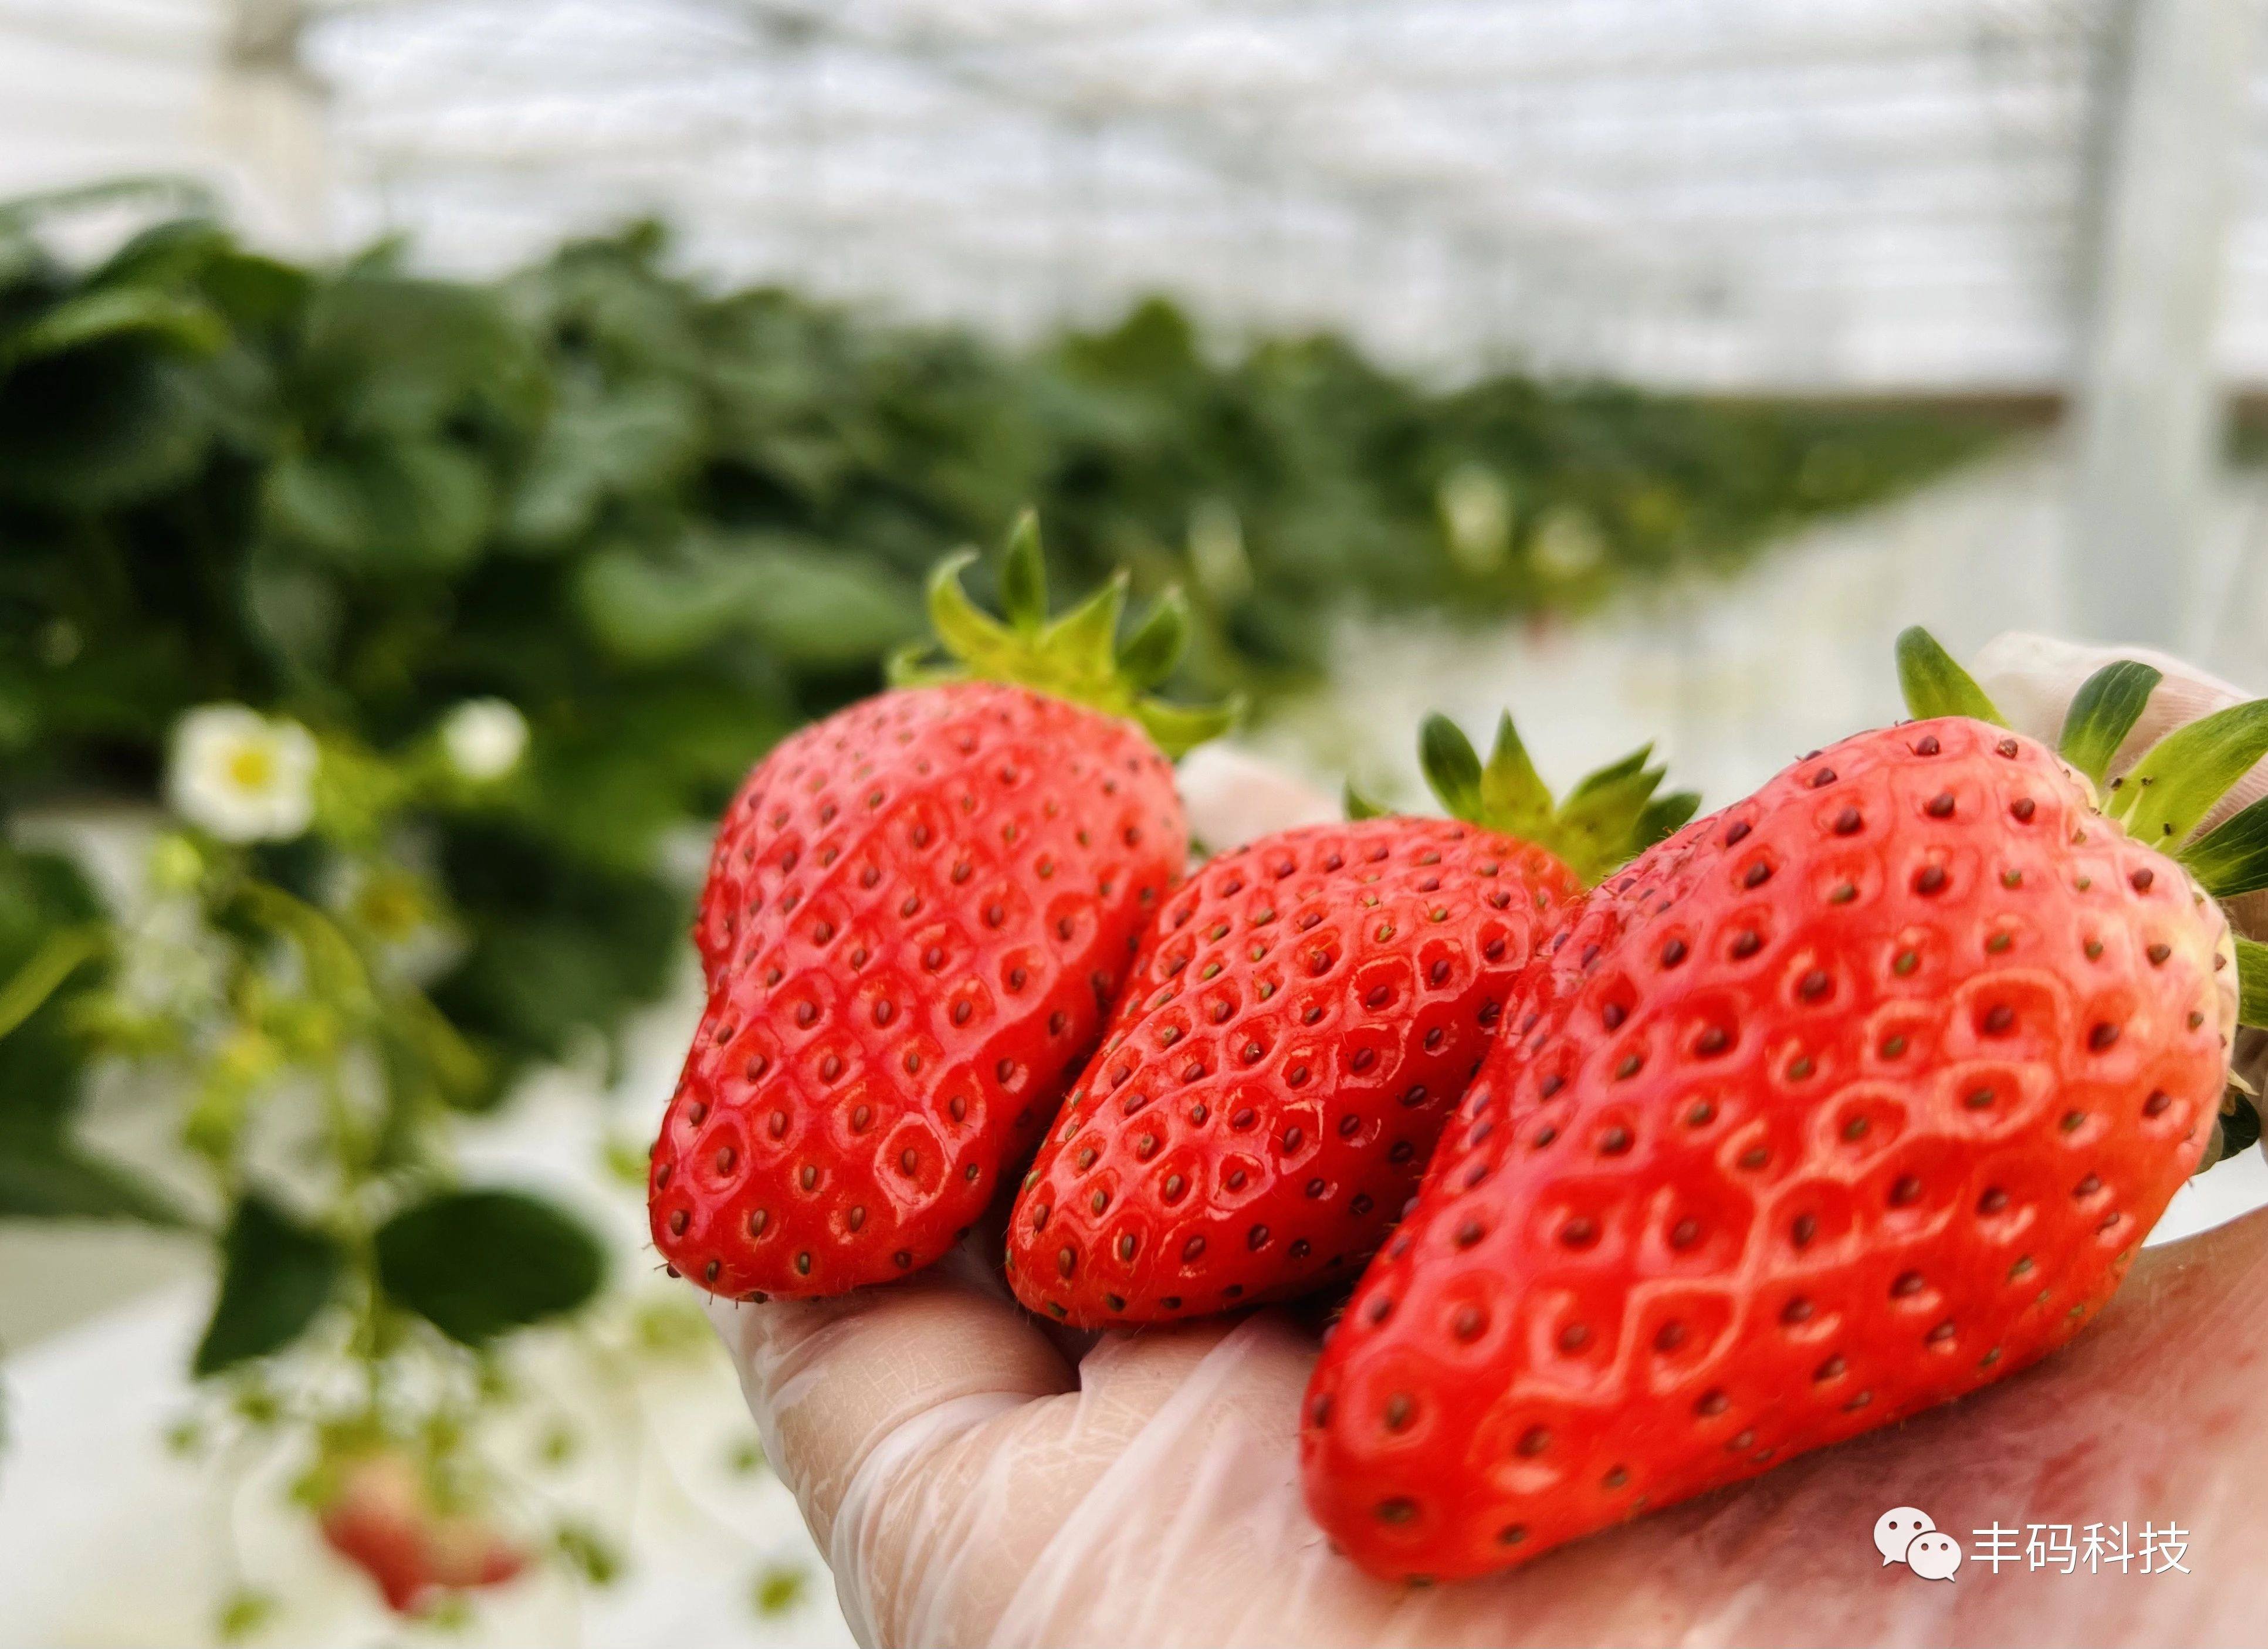 Fengsheng | After Tomatoes, Fengma Strawberry has once again obtained GAP certification!